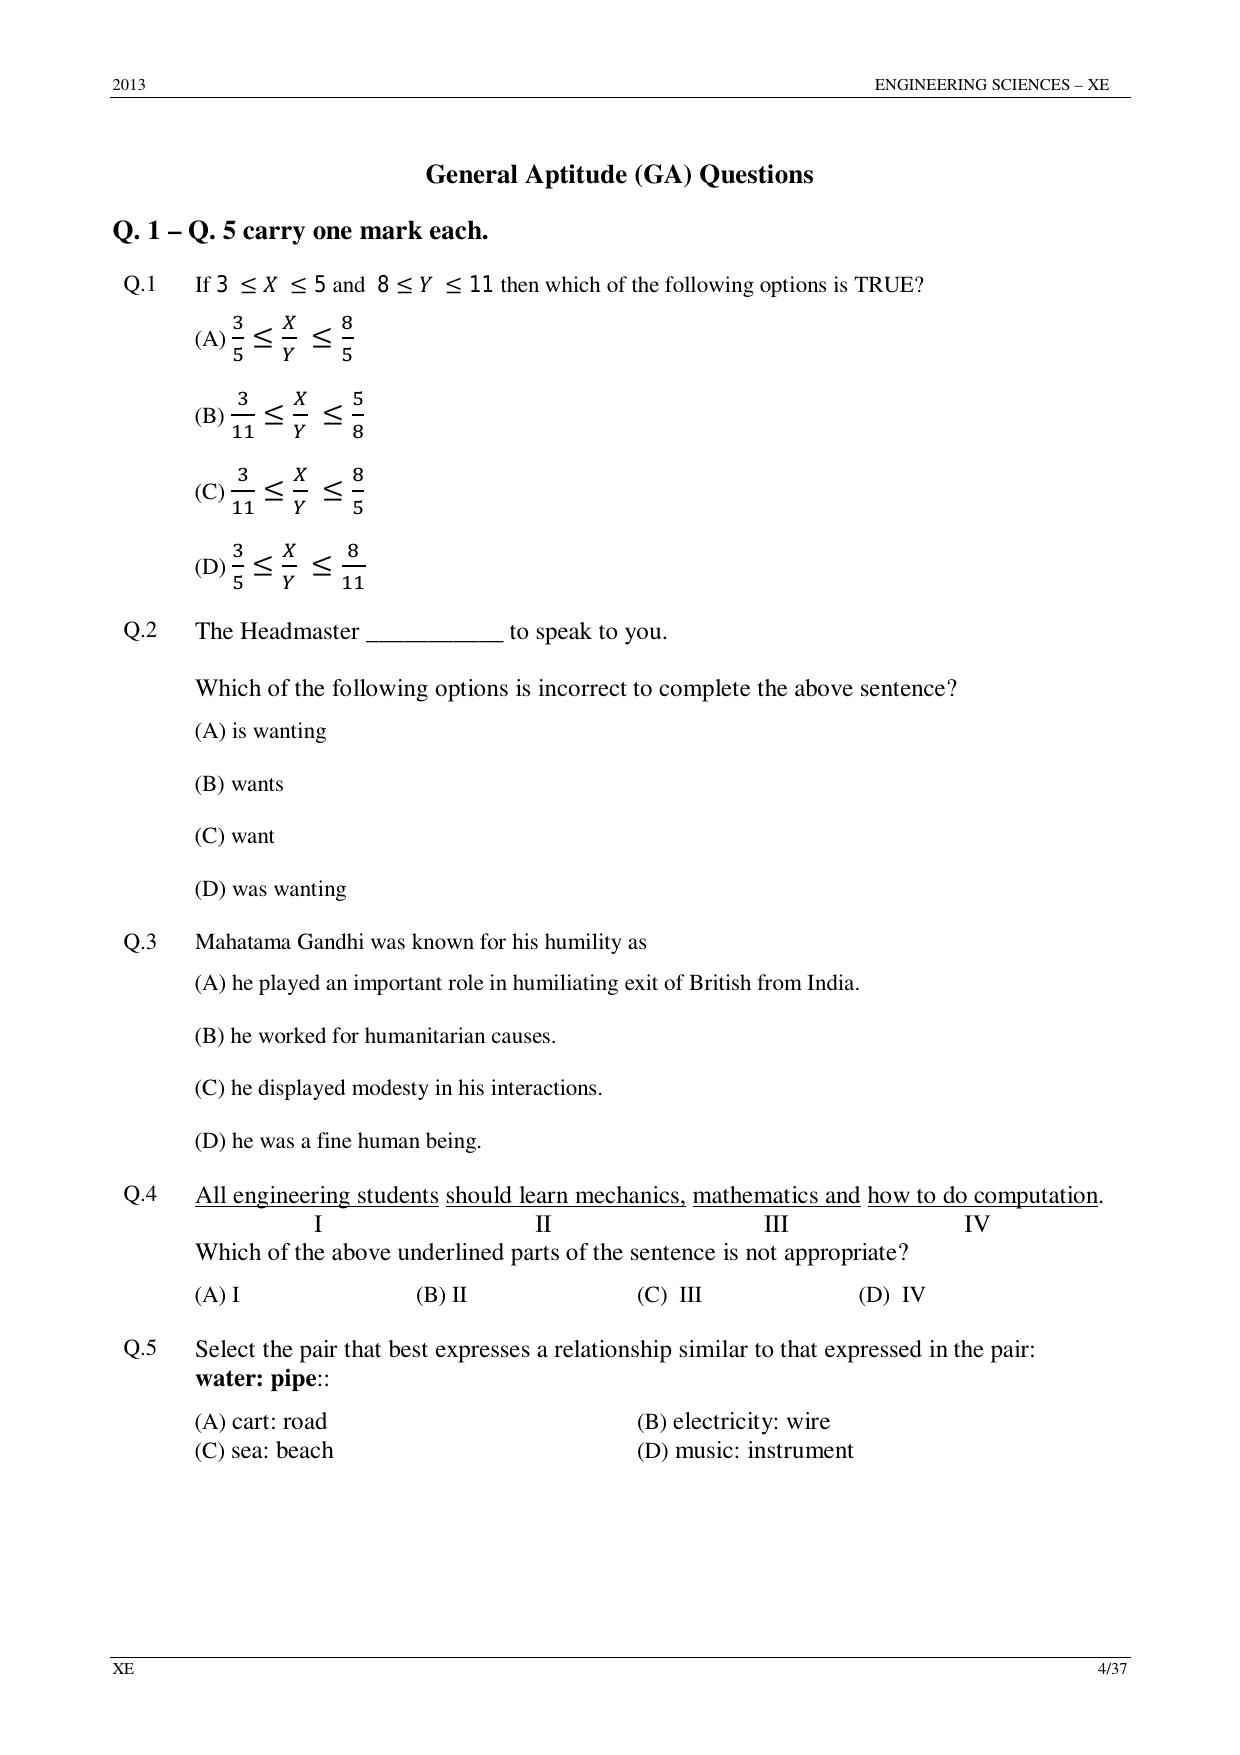 GATE 2013 Engineering Sciences (XE) Question Paper with Answer Key - Page 4